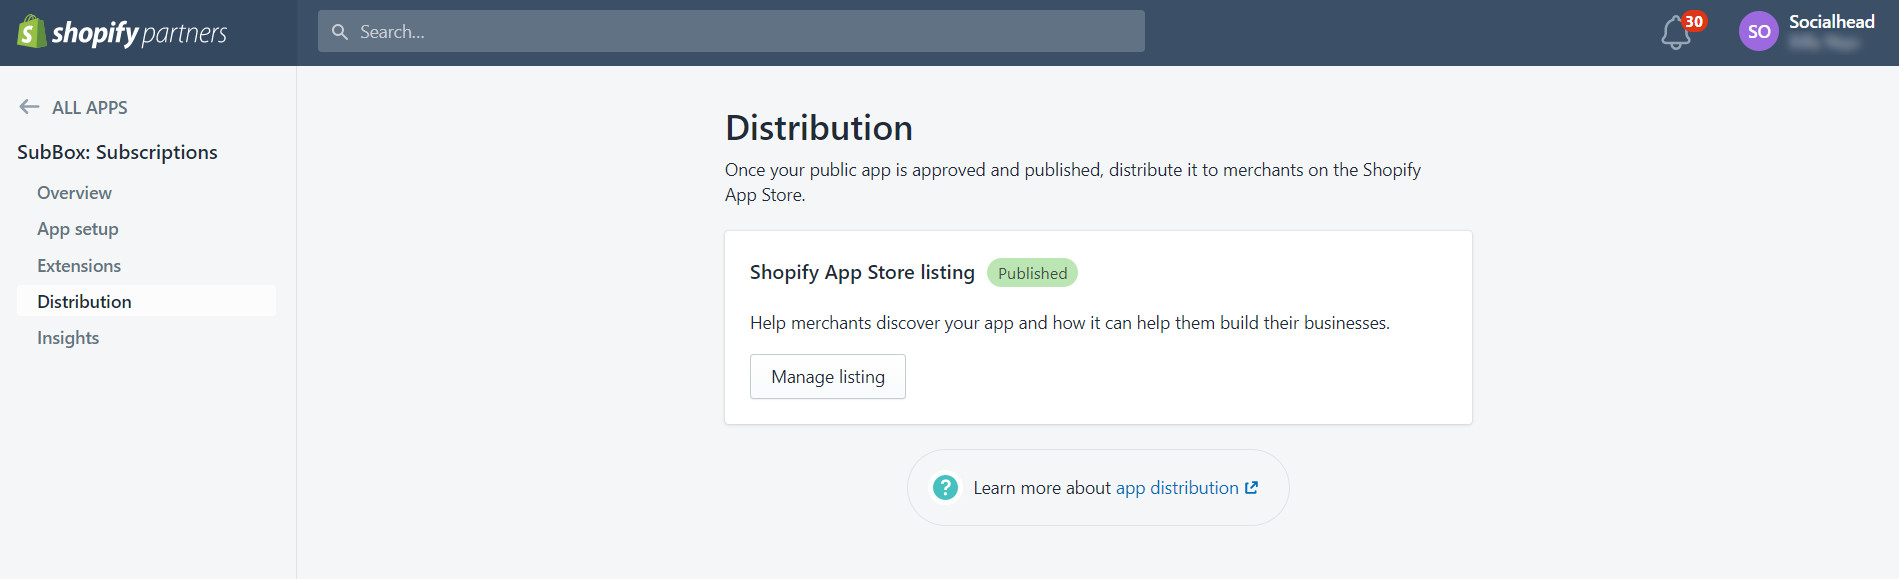 The app review process in Shopify 